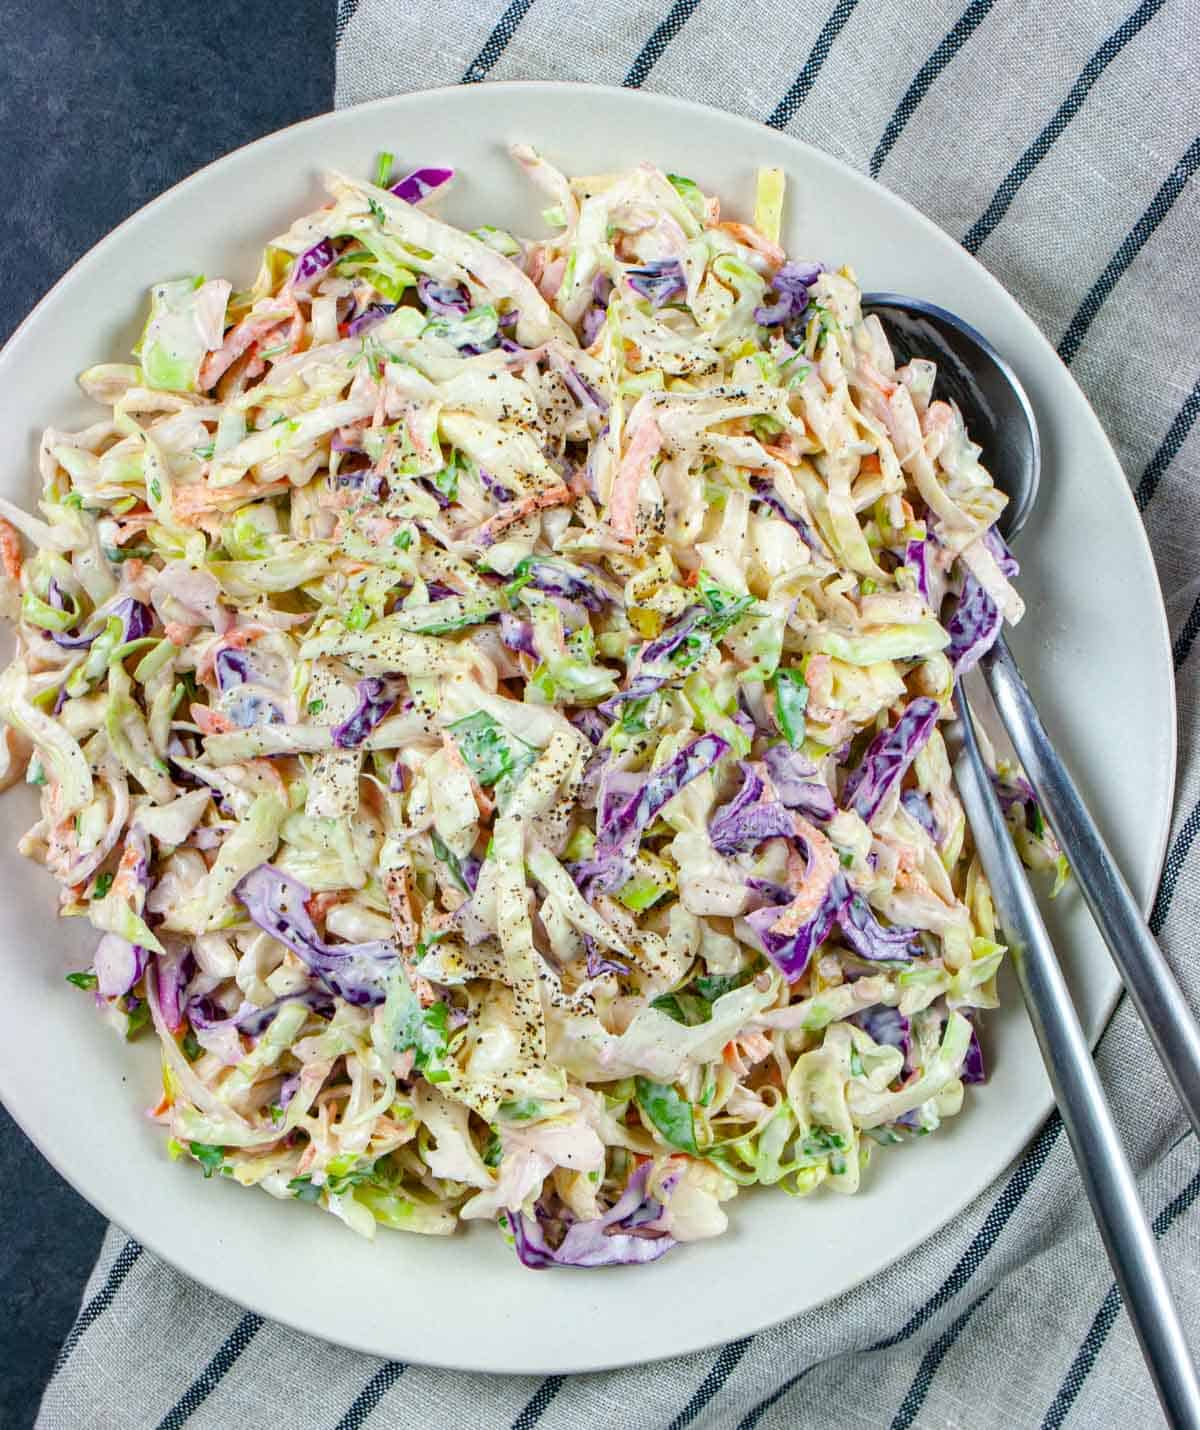 White bowl of slaw sprinkled with black pepper with a fork and spoon.